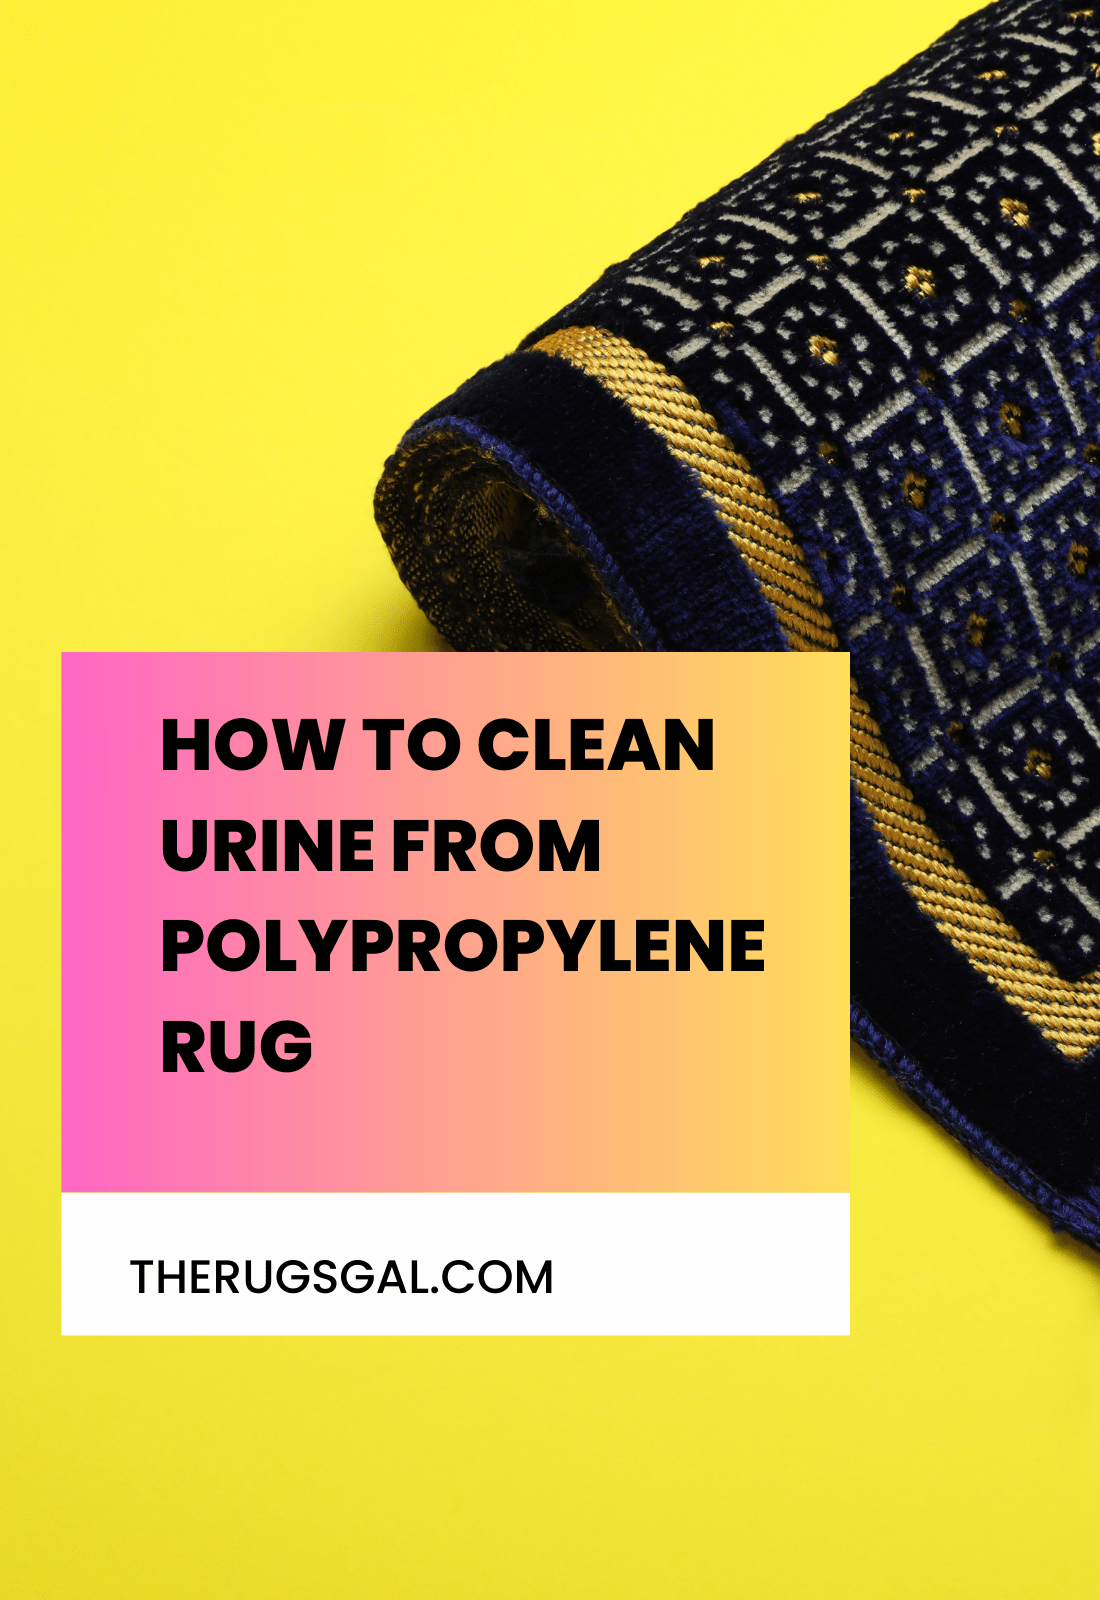 How to Clean Urine from Polypropylene Rug